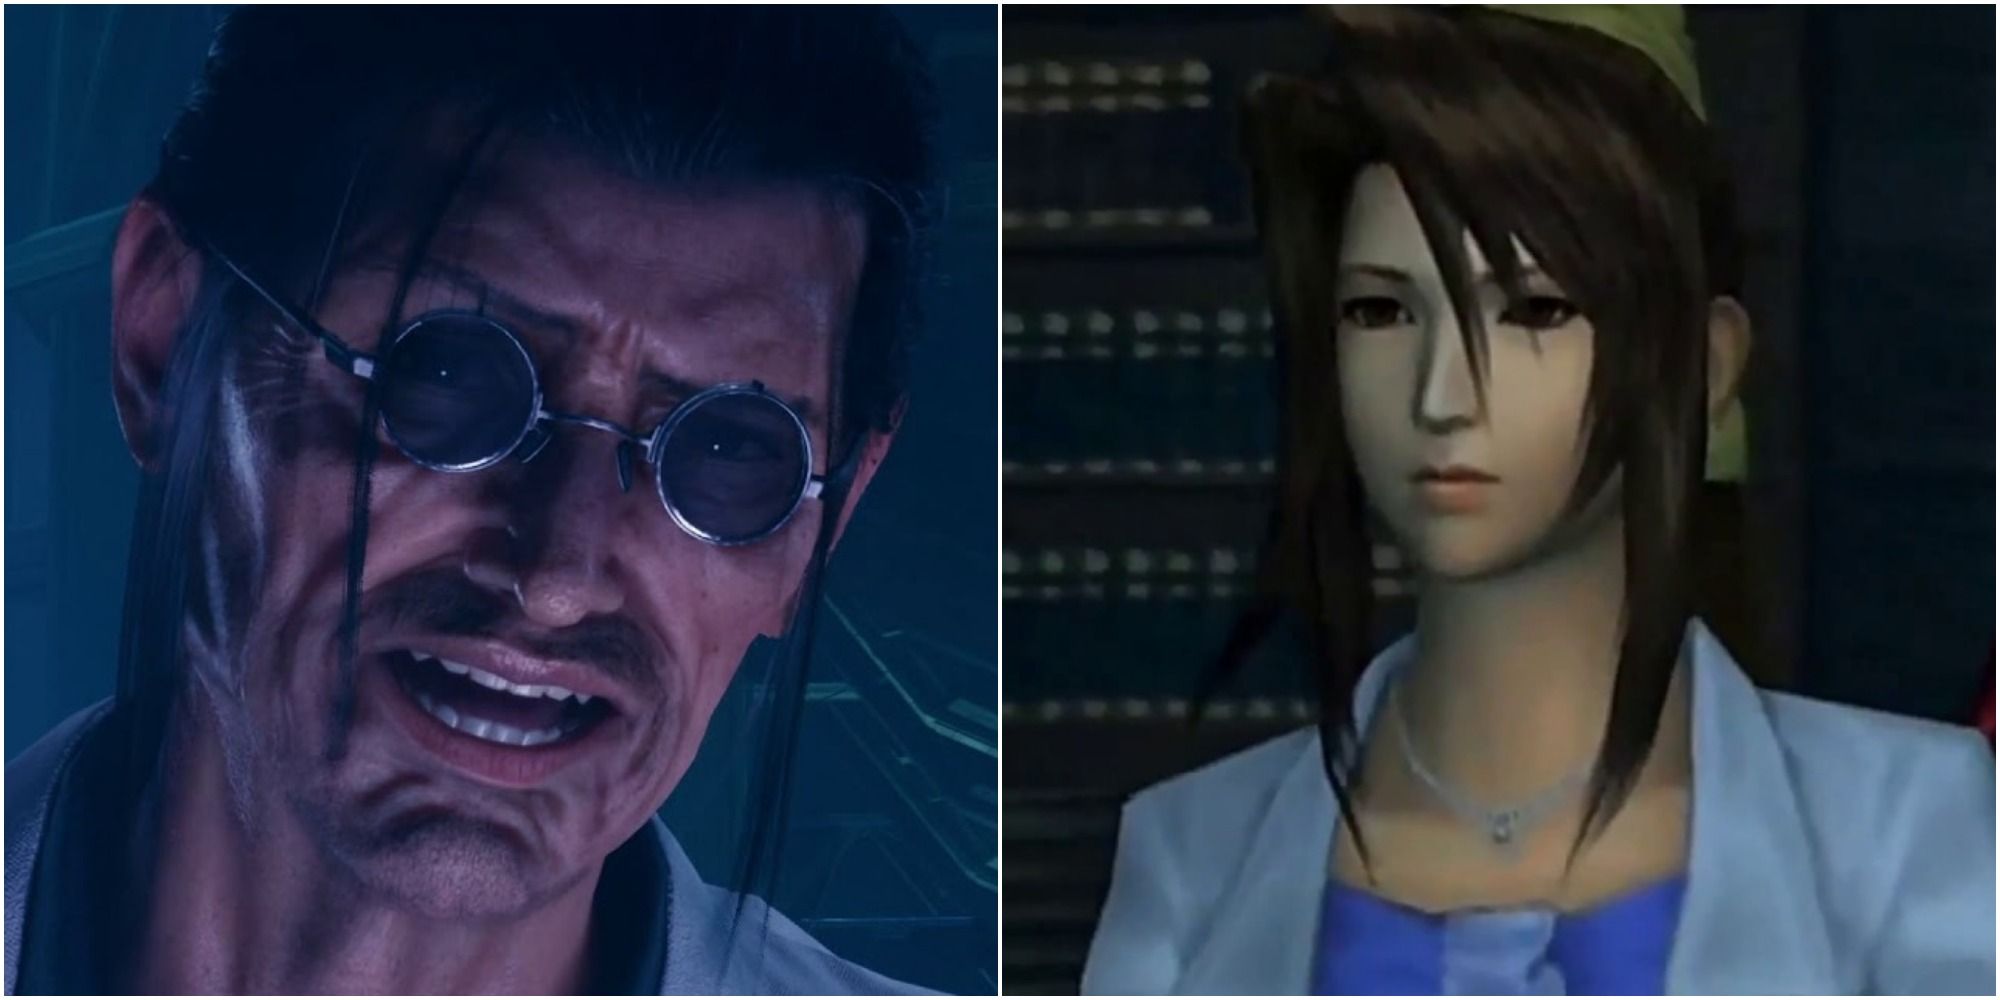 Hojo in Final Fantasy 7 Remake and Lucrecia from Dirge of Cerberus